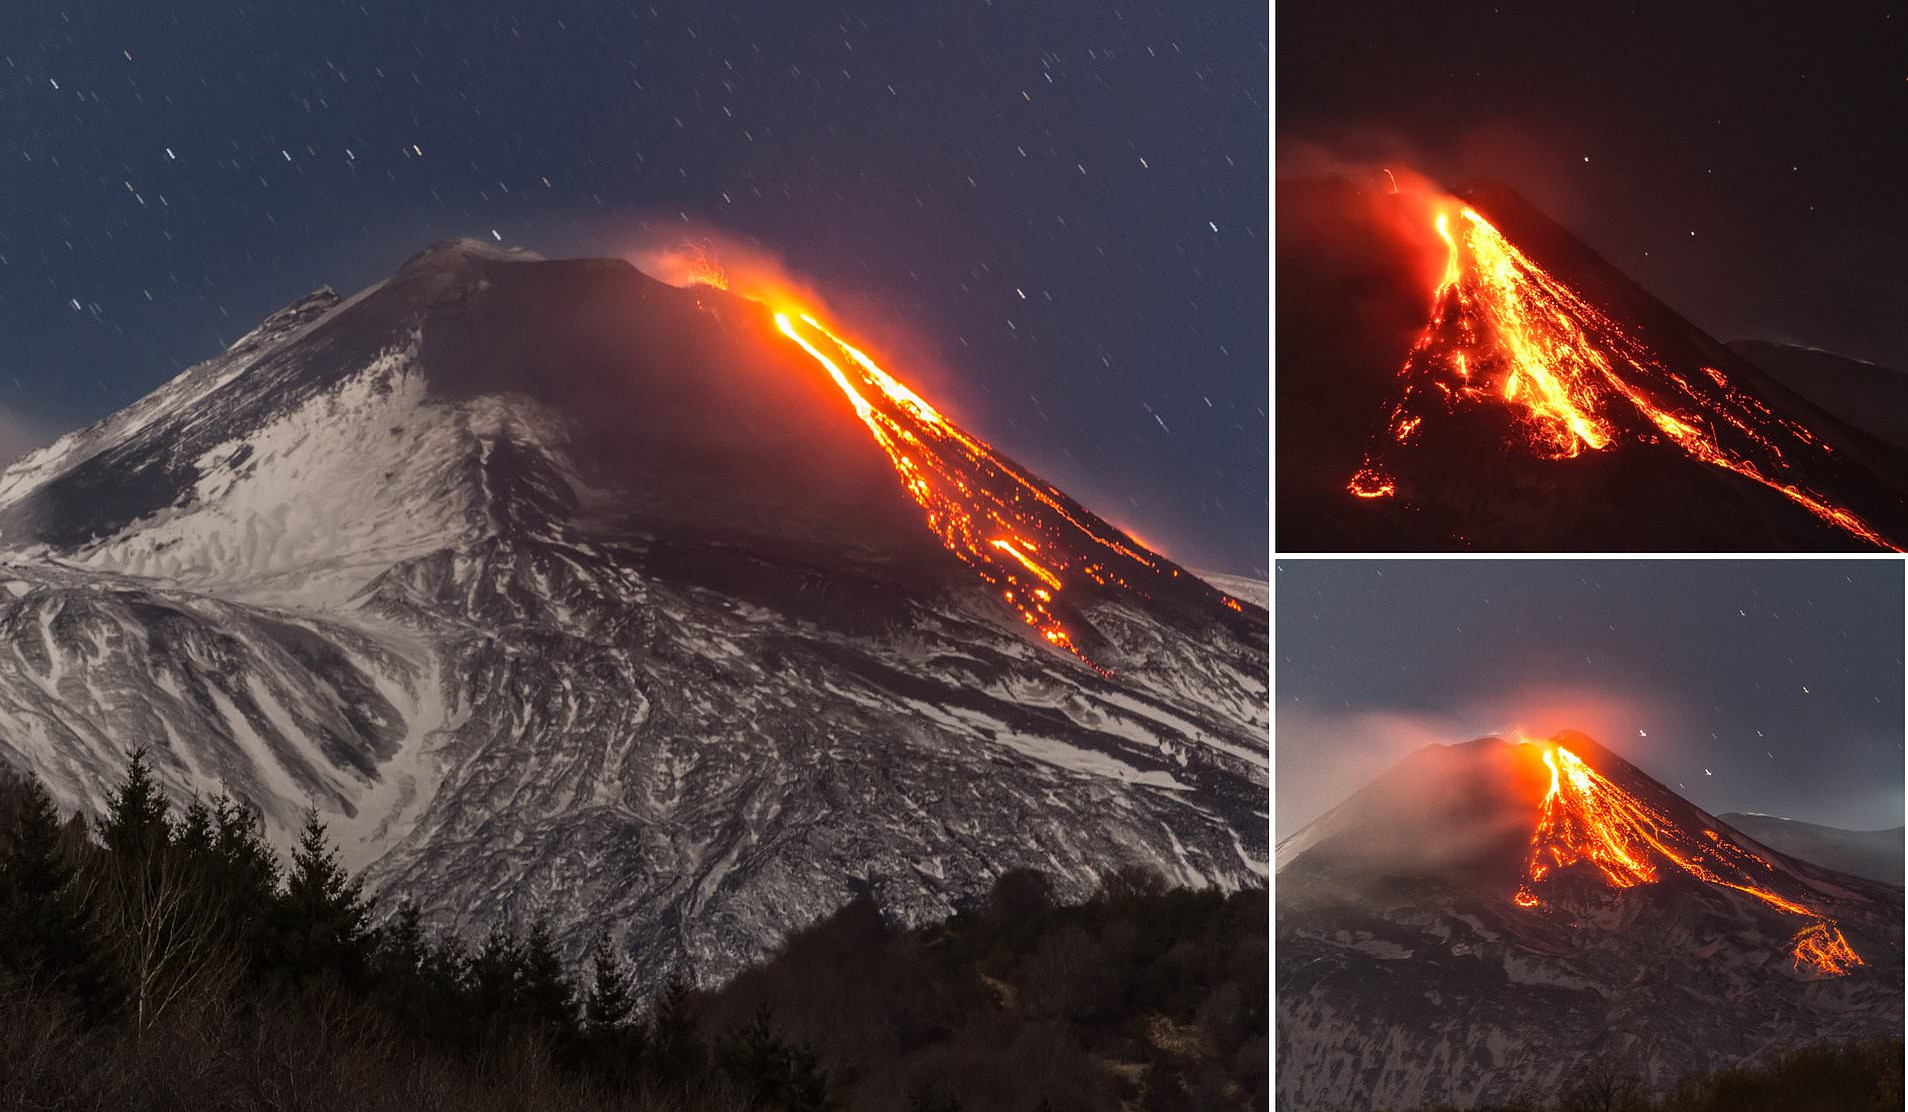 Snowy Mount Etna roars into action spurting lava into night sky